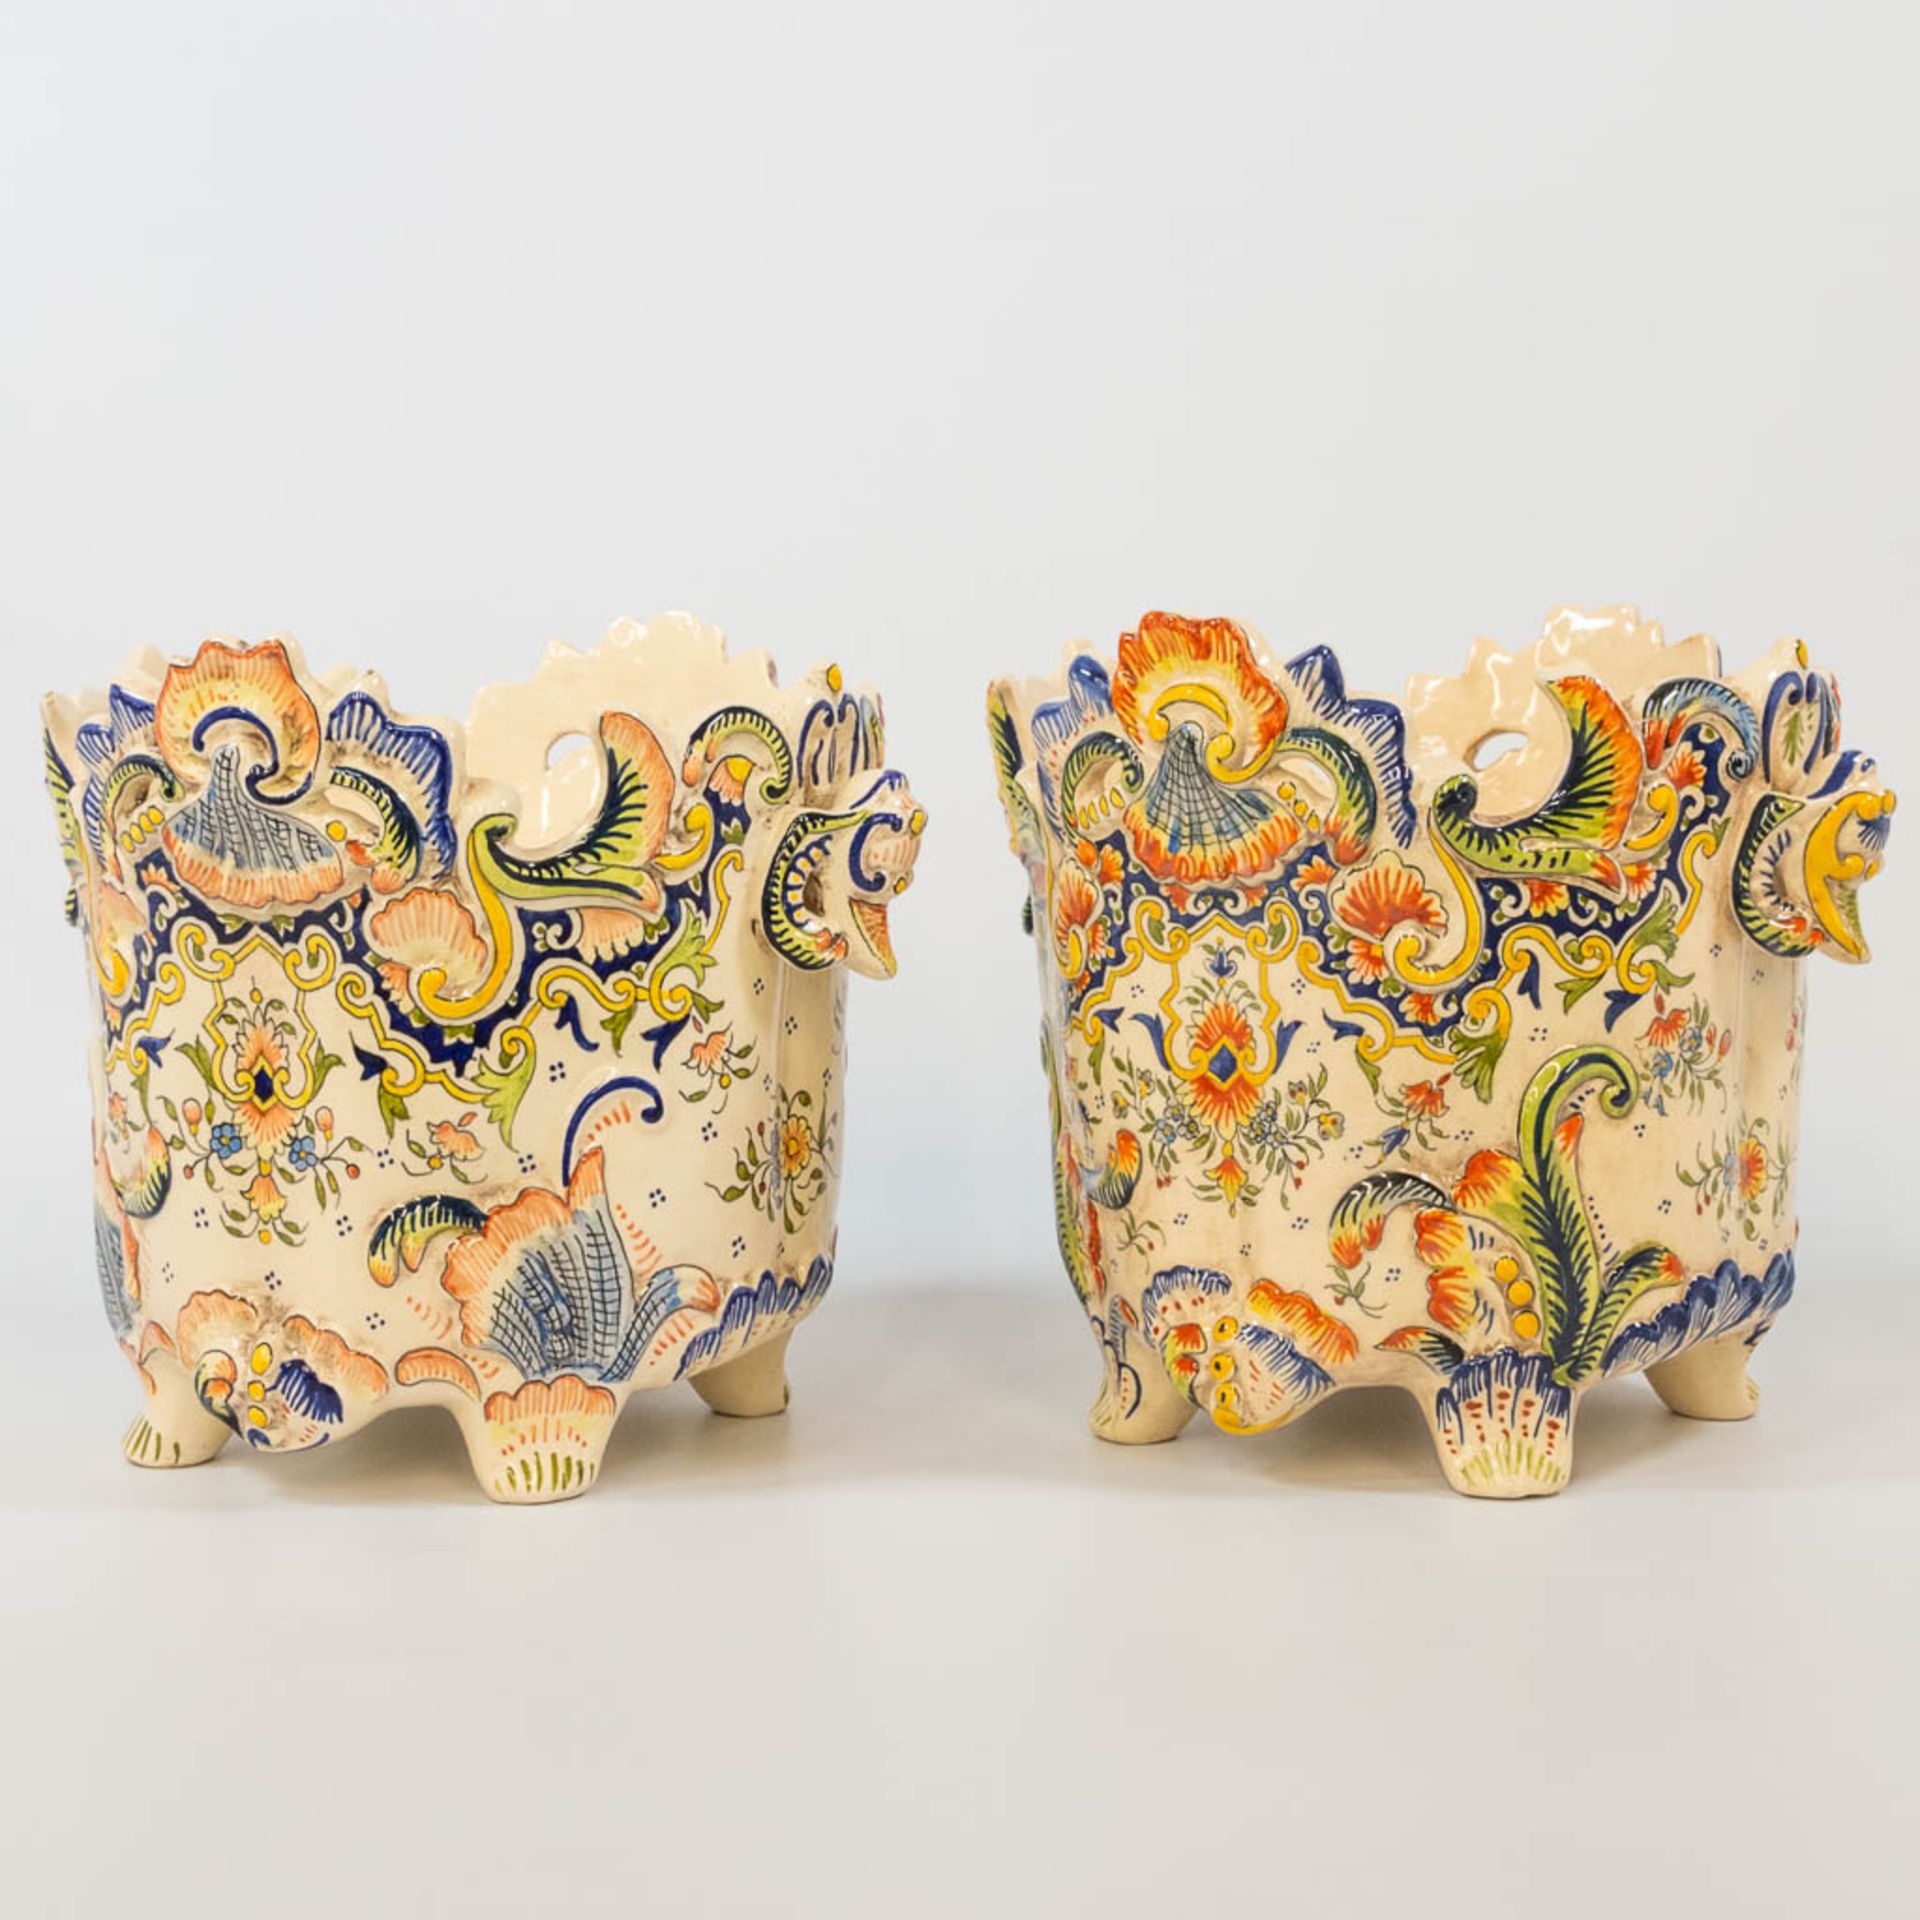 A pair of cache-pots with hand-painted decor, made of faience in Rouen, France. (23 x 27 x 22 cm) - Bild 11 aus 17